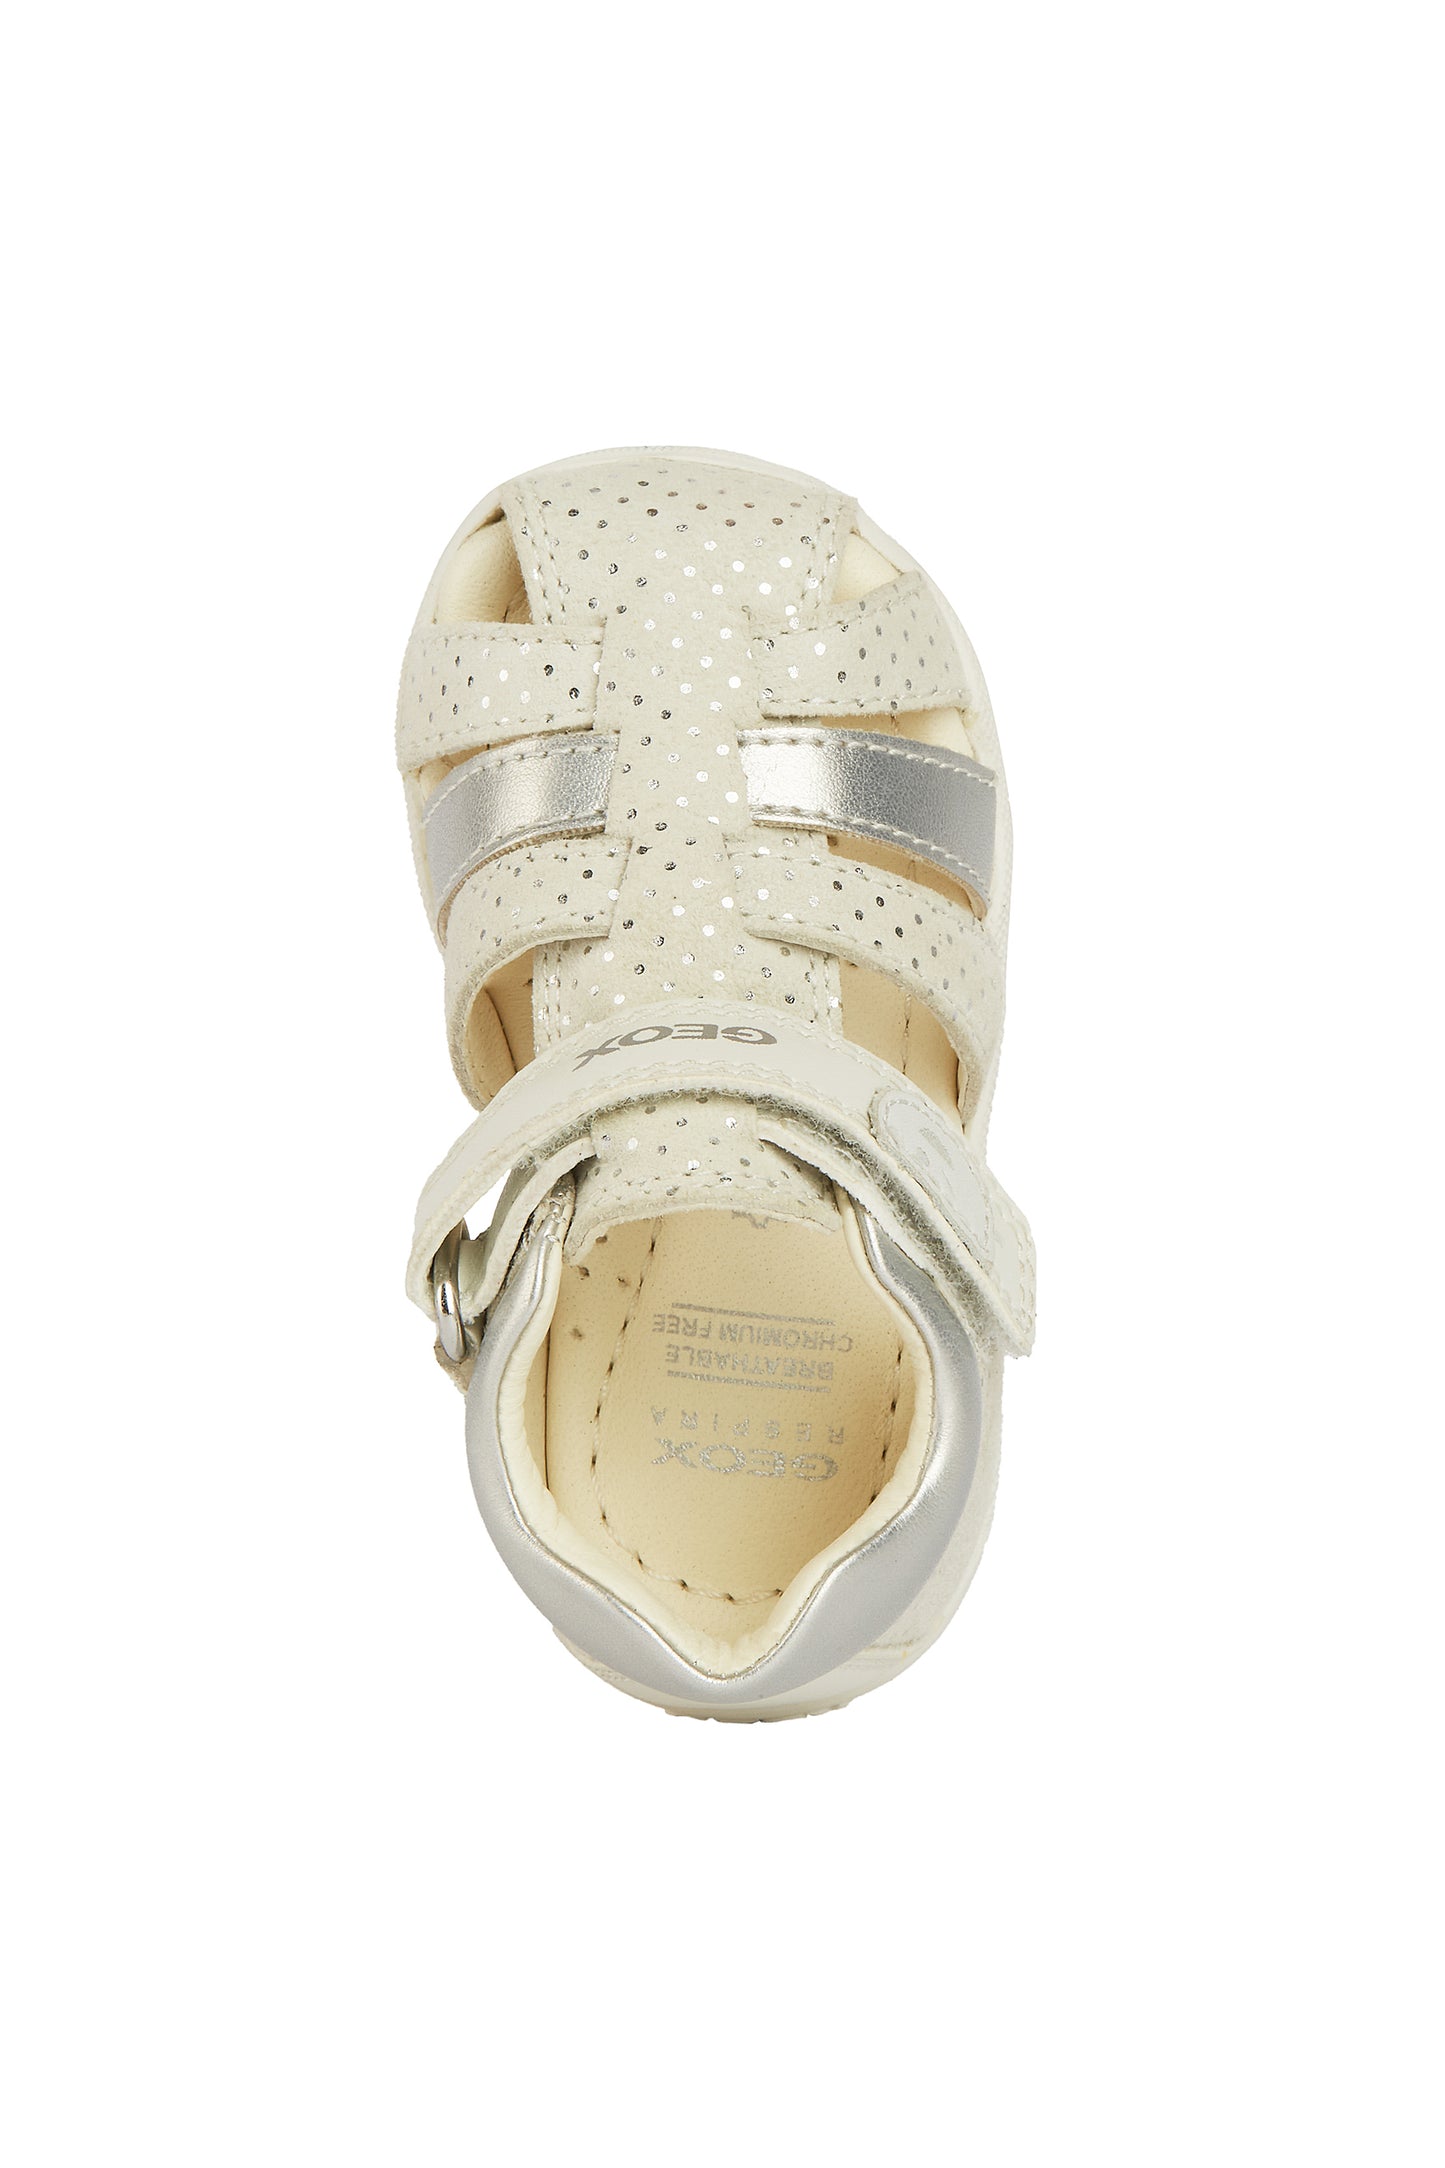 A girls closed toe sandal by Geox, style B Macchia, in off white spot print and silver nubuck leather with velcro fastening.Right side view. View from above.